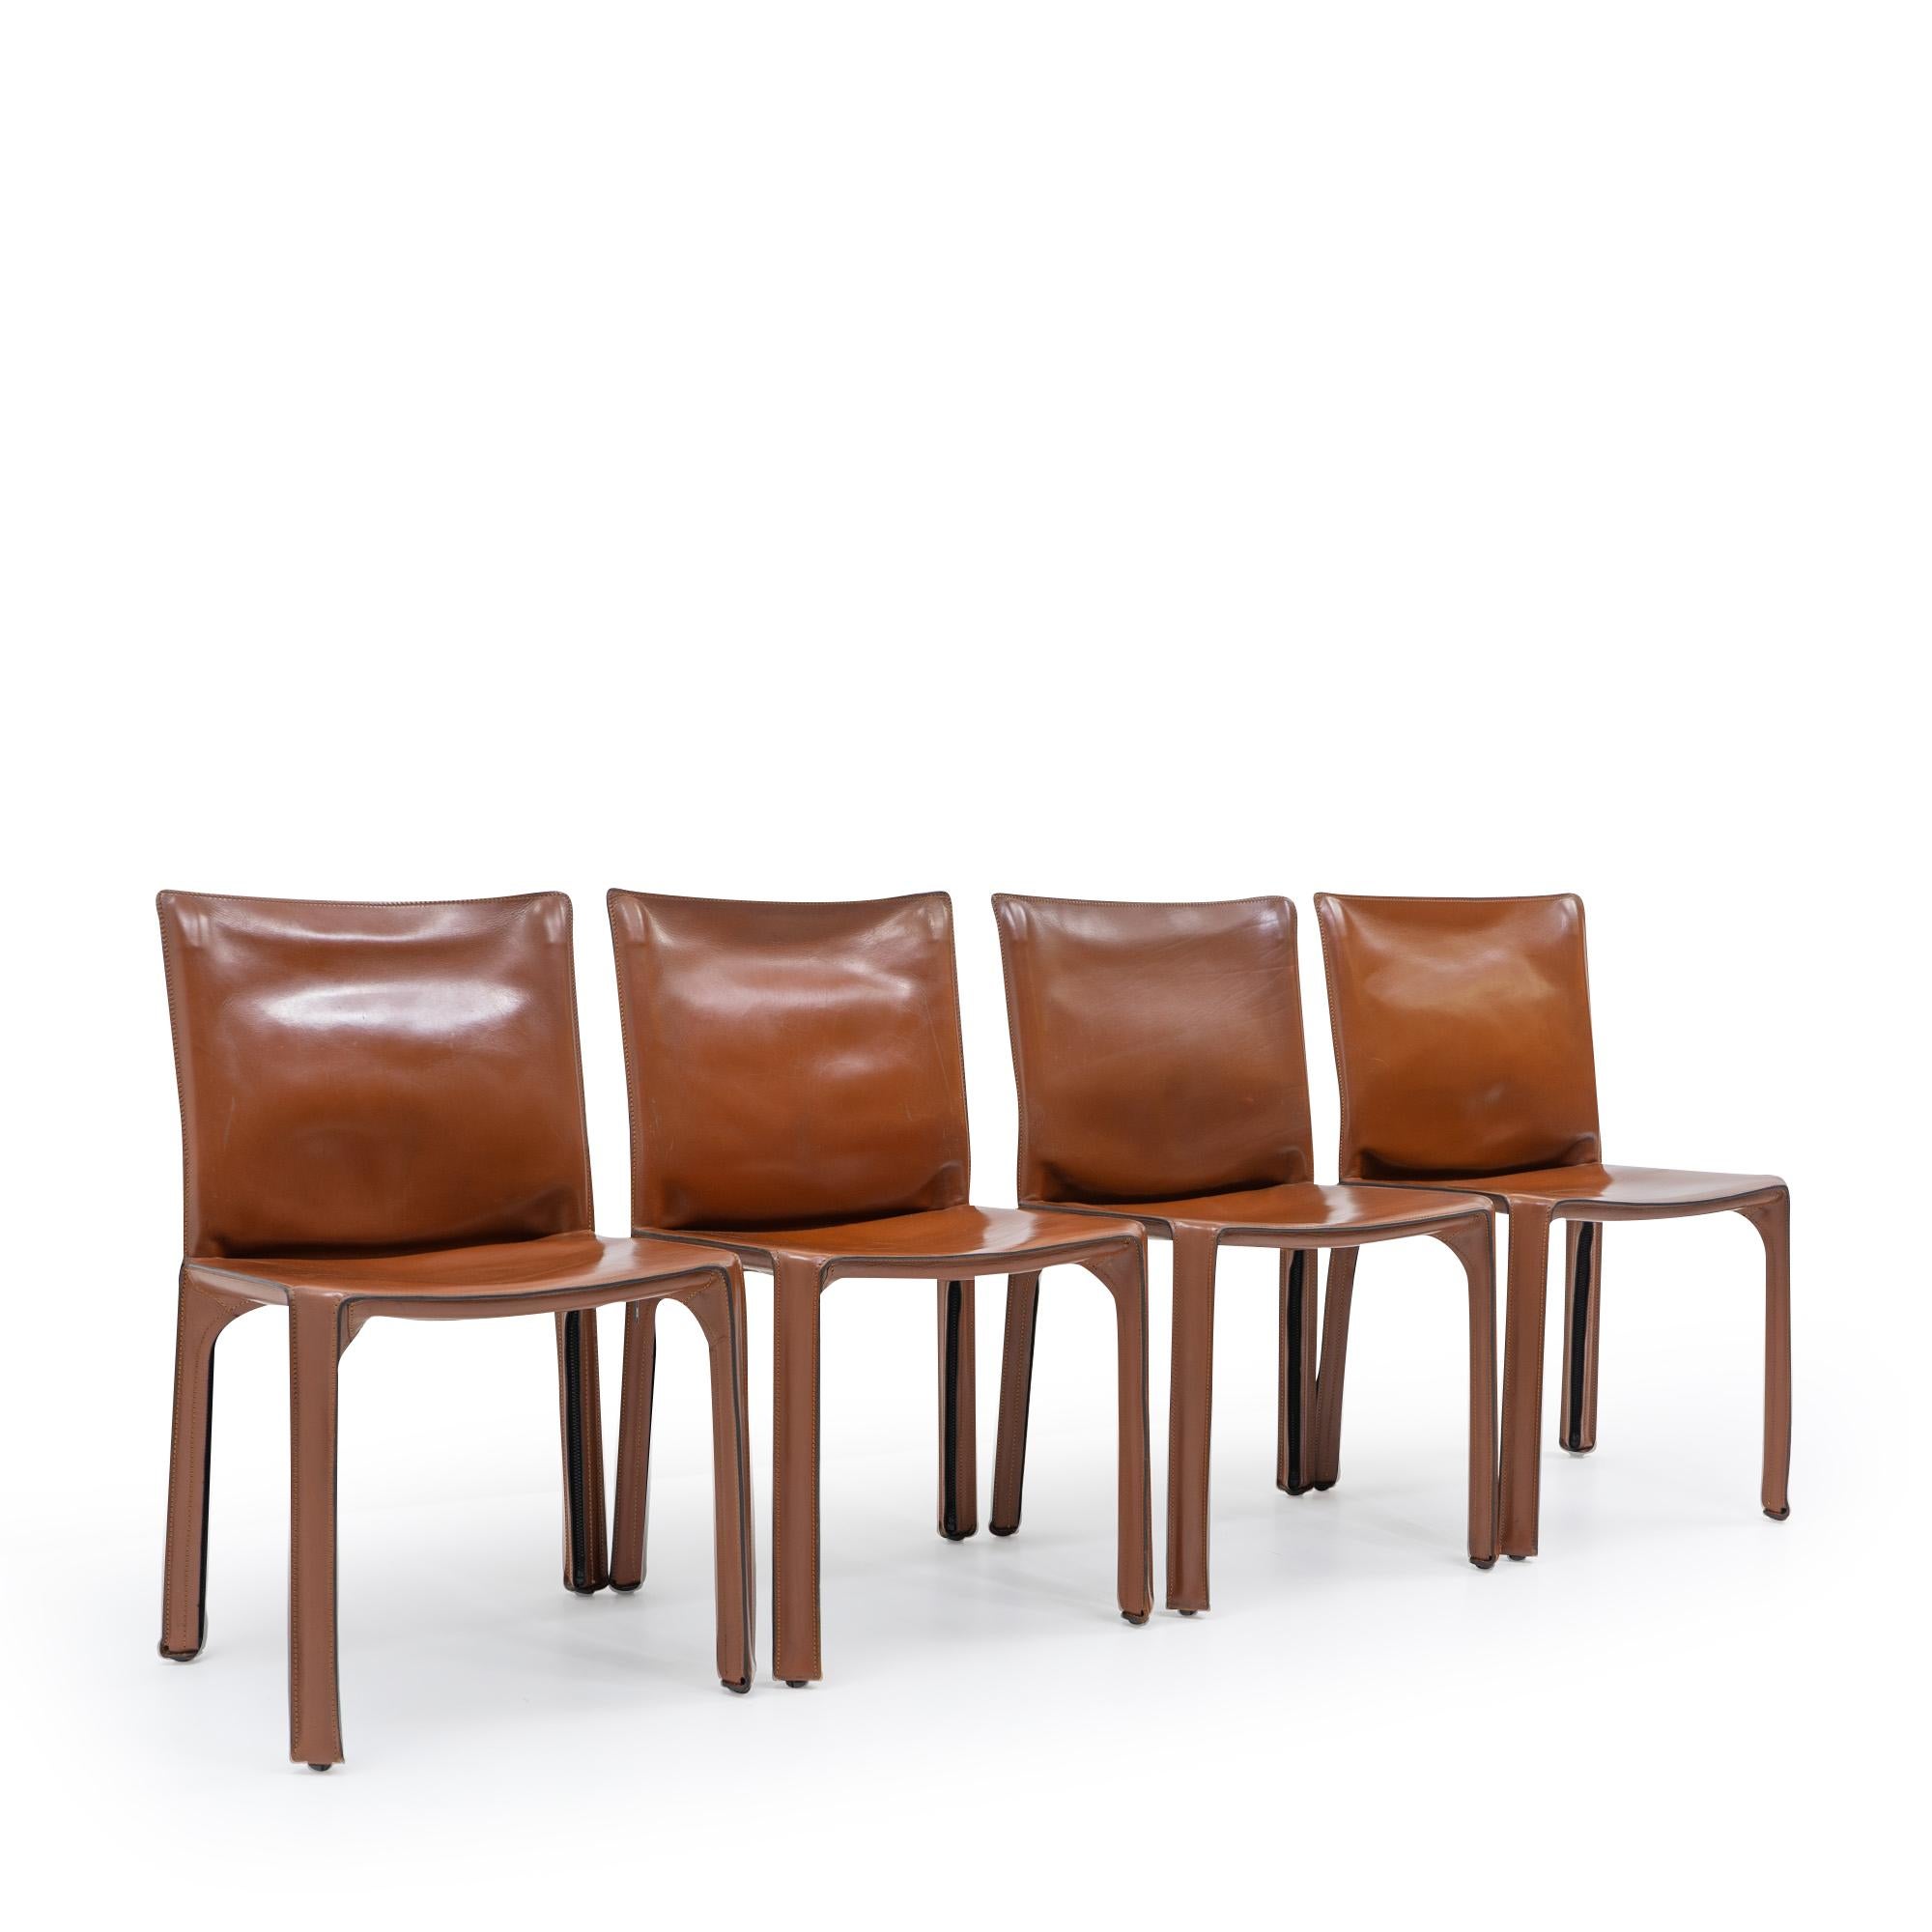 Set of four Cab 412 side chairs in red-brown leather by Mario Bellini for Cassina.

The Cab chair is built up as a tubular frame over which thick saddle leather is fitted; the leather skin is kept in place with zippers on the inside legs.

A